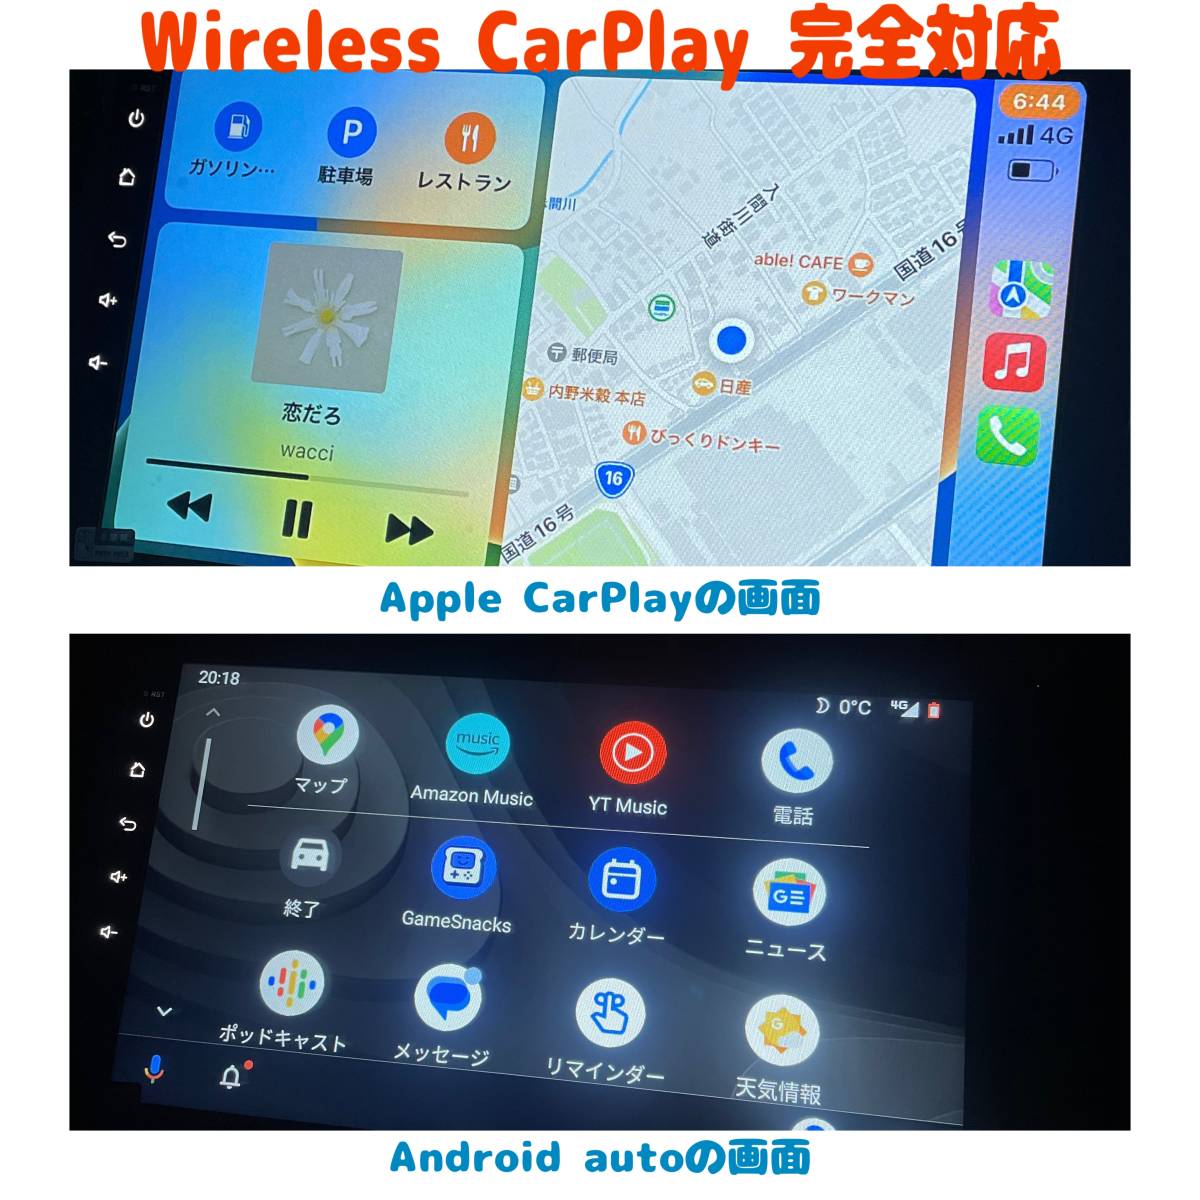  now . riding. own car . birth changes!? newest. large screen Android navi . grade up doesn't do .?CarPlay AndroidOS installing large screen 